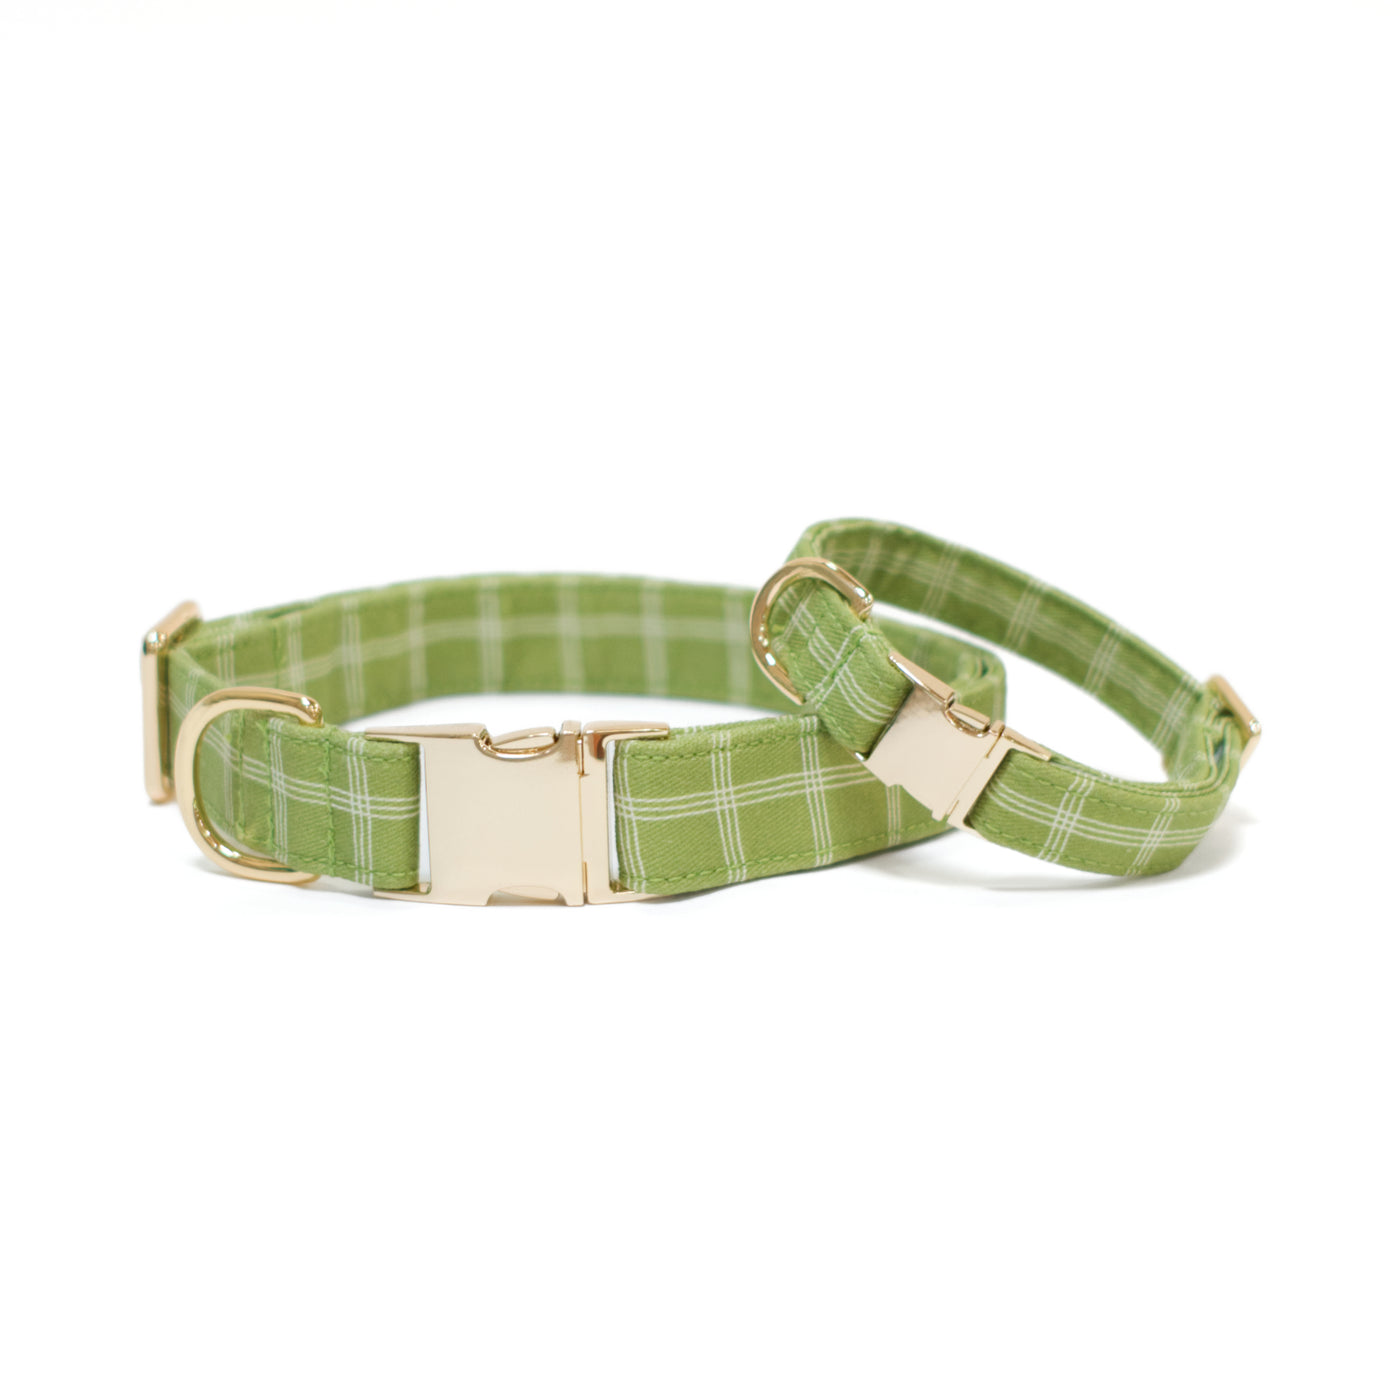 Spring green triple windowpane plaid dog collar with gold hardware shown in sizes medium and small